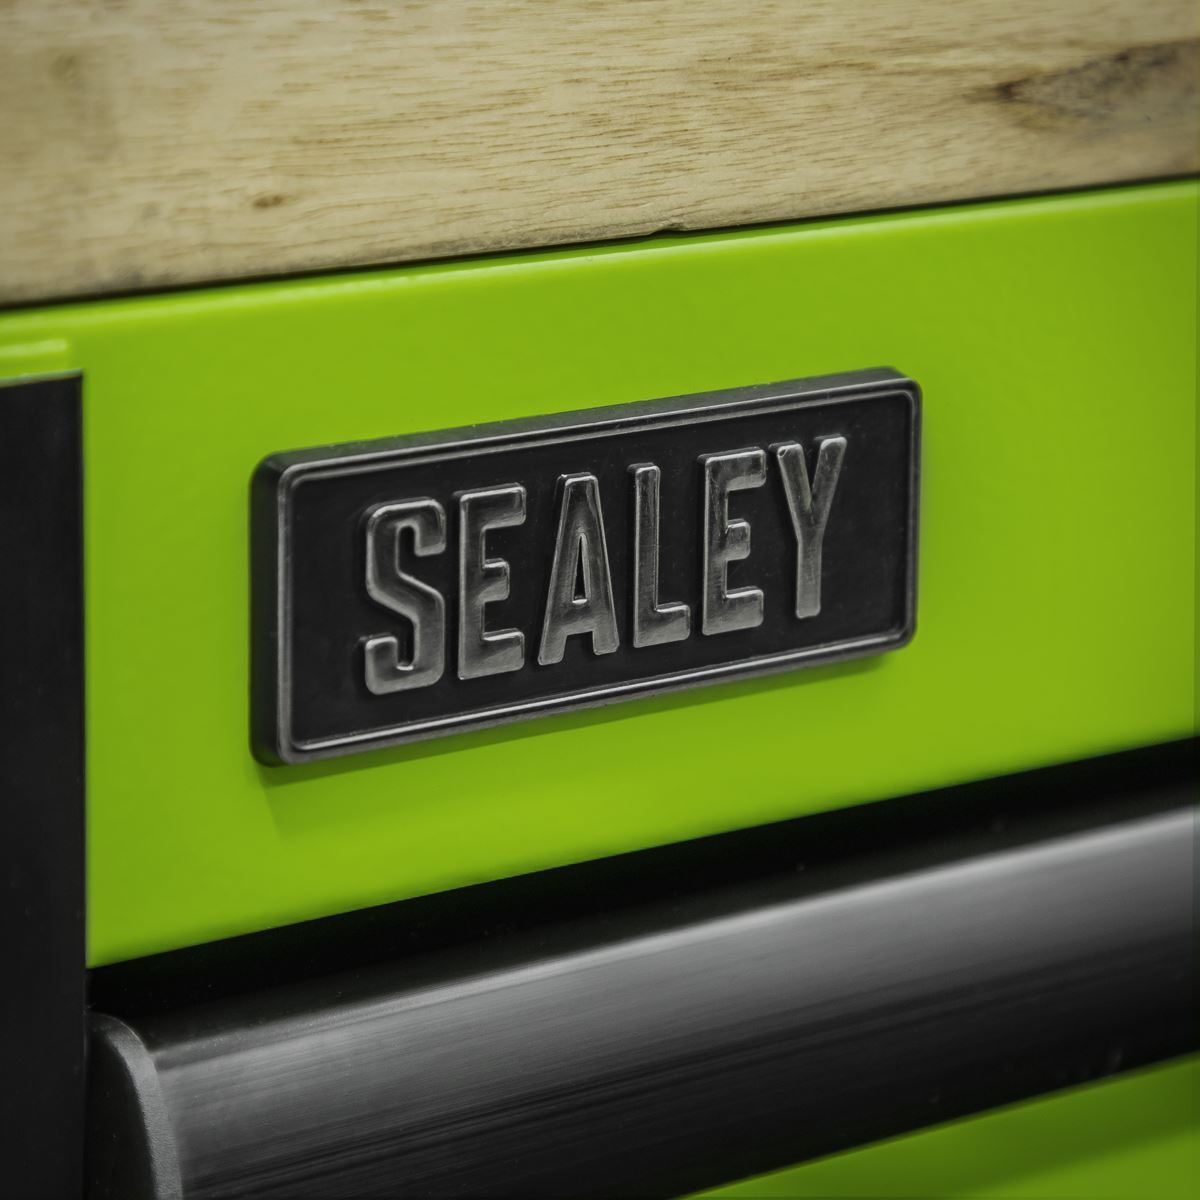 Sealey Superline Pro 15 Drawer 1549mm Mobile Trolley with Wooden Worktop and Hutch and 2 Drawer Riser